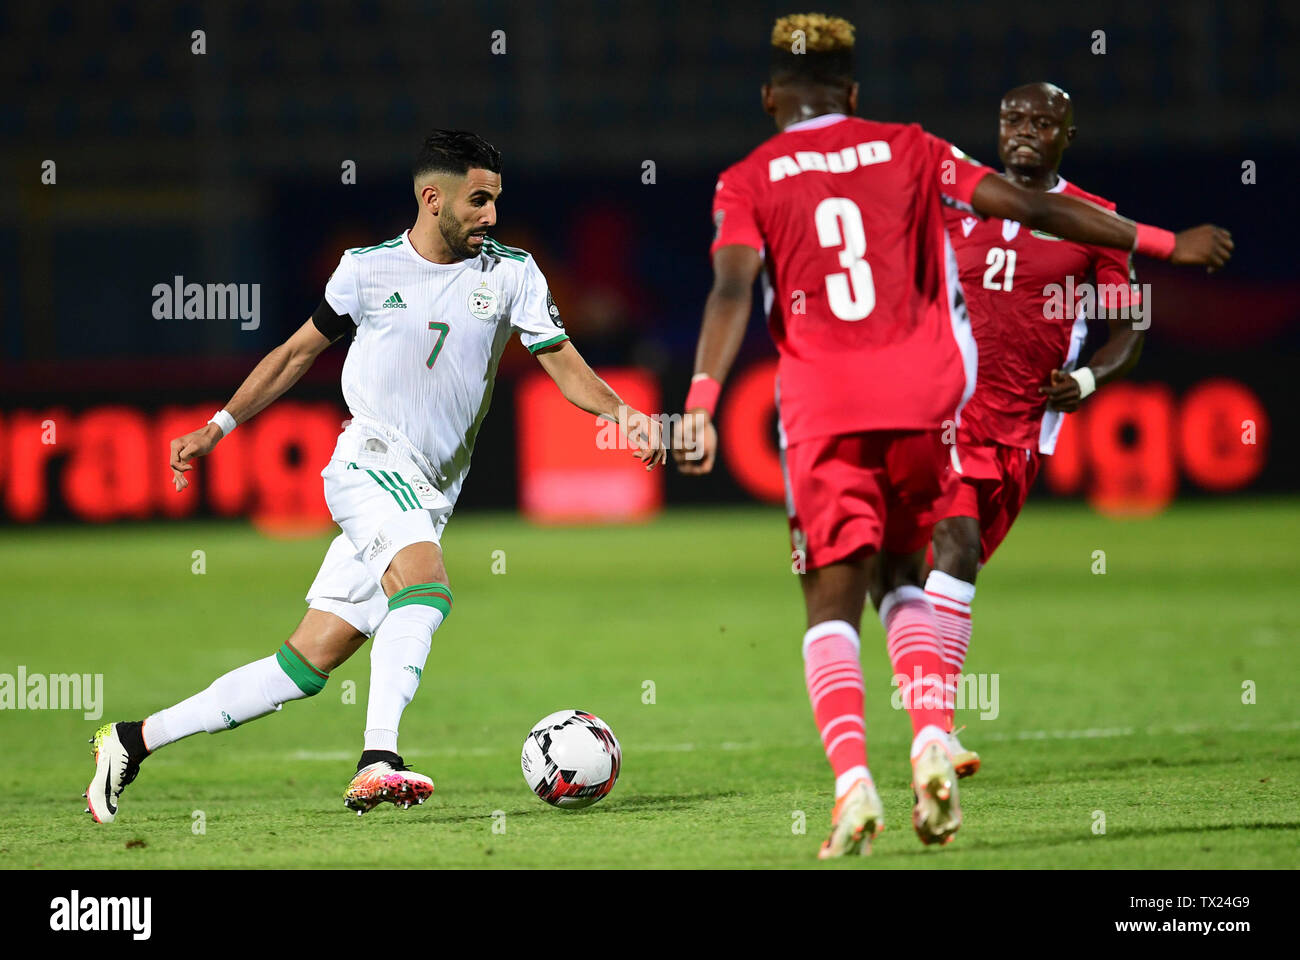 Cairo. 23rd June, 2019. Riyad Mahrez (L) of Algeria breaks through during the 2019 African Cup of Nations Group C match between Algeria and Kenya in Cario, Egypt on June 23, 2019. Algeria won 2-0. Credit: Wu Huiwo/Xinhua/Alamy Live News Stock Photo